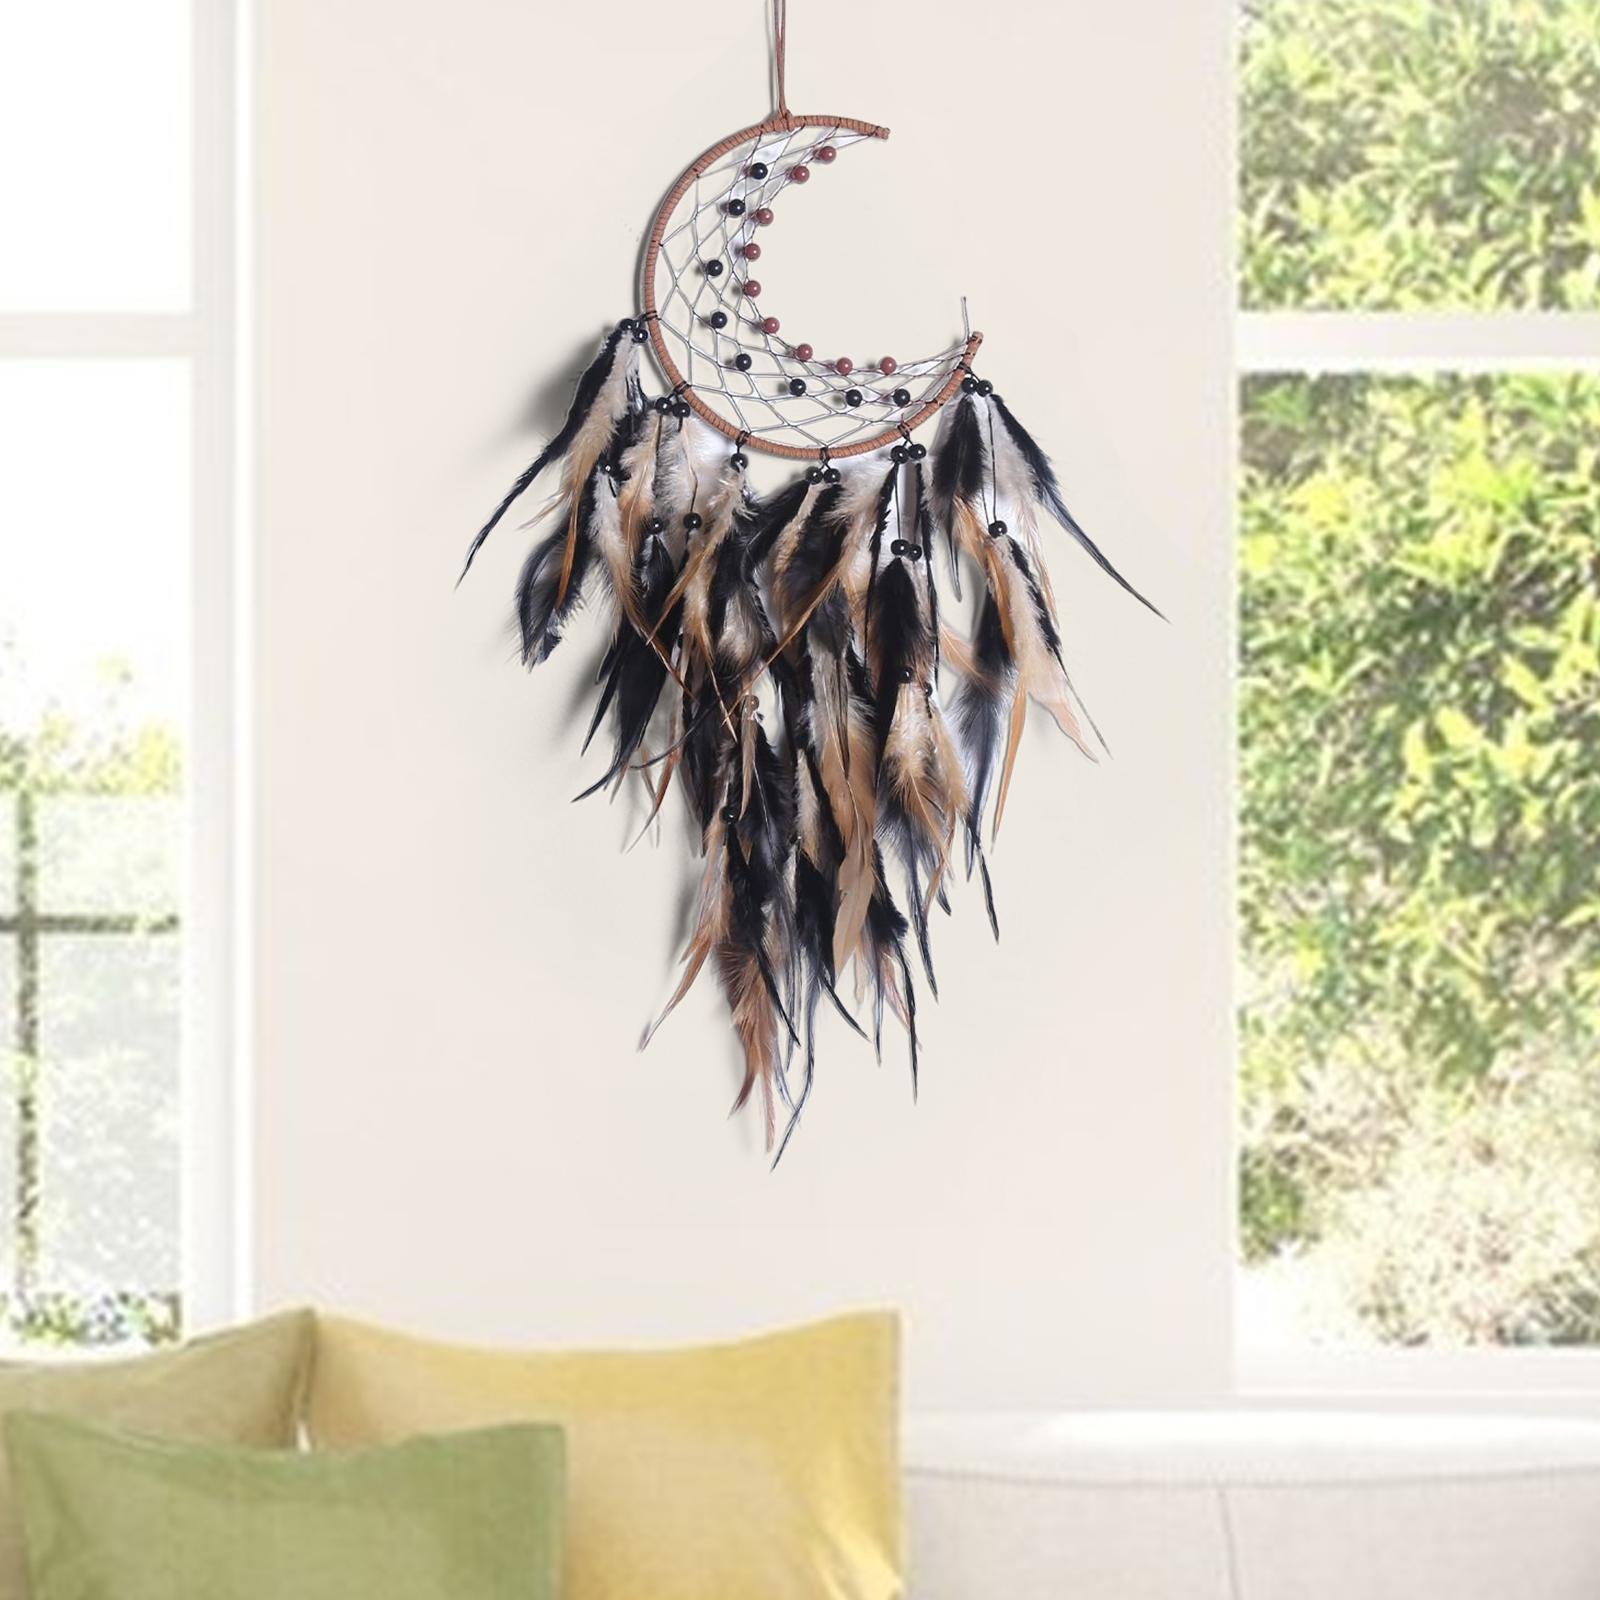 Boho Macrame Wall Hanging Handmade Braided Wall Decor Pendant for Party Home Decoration